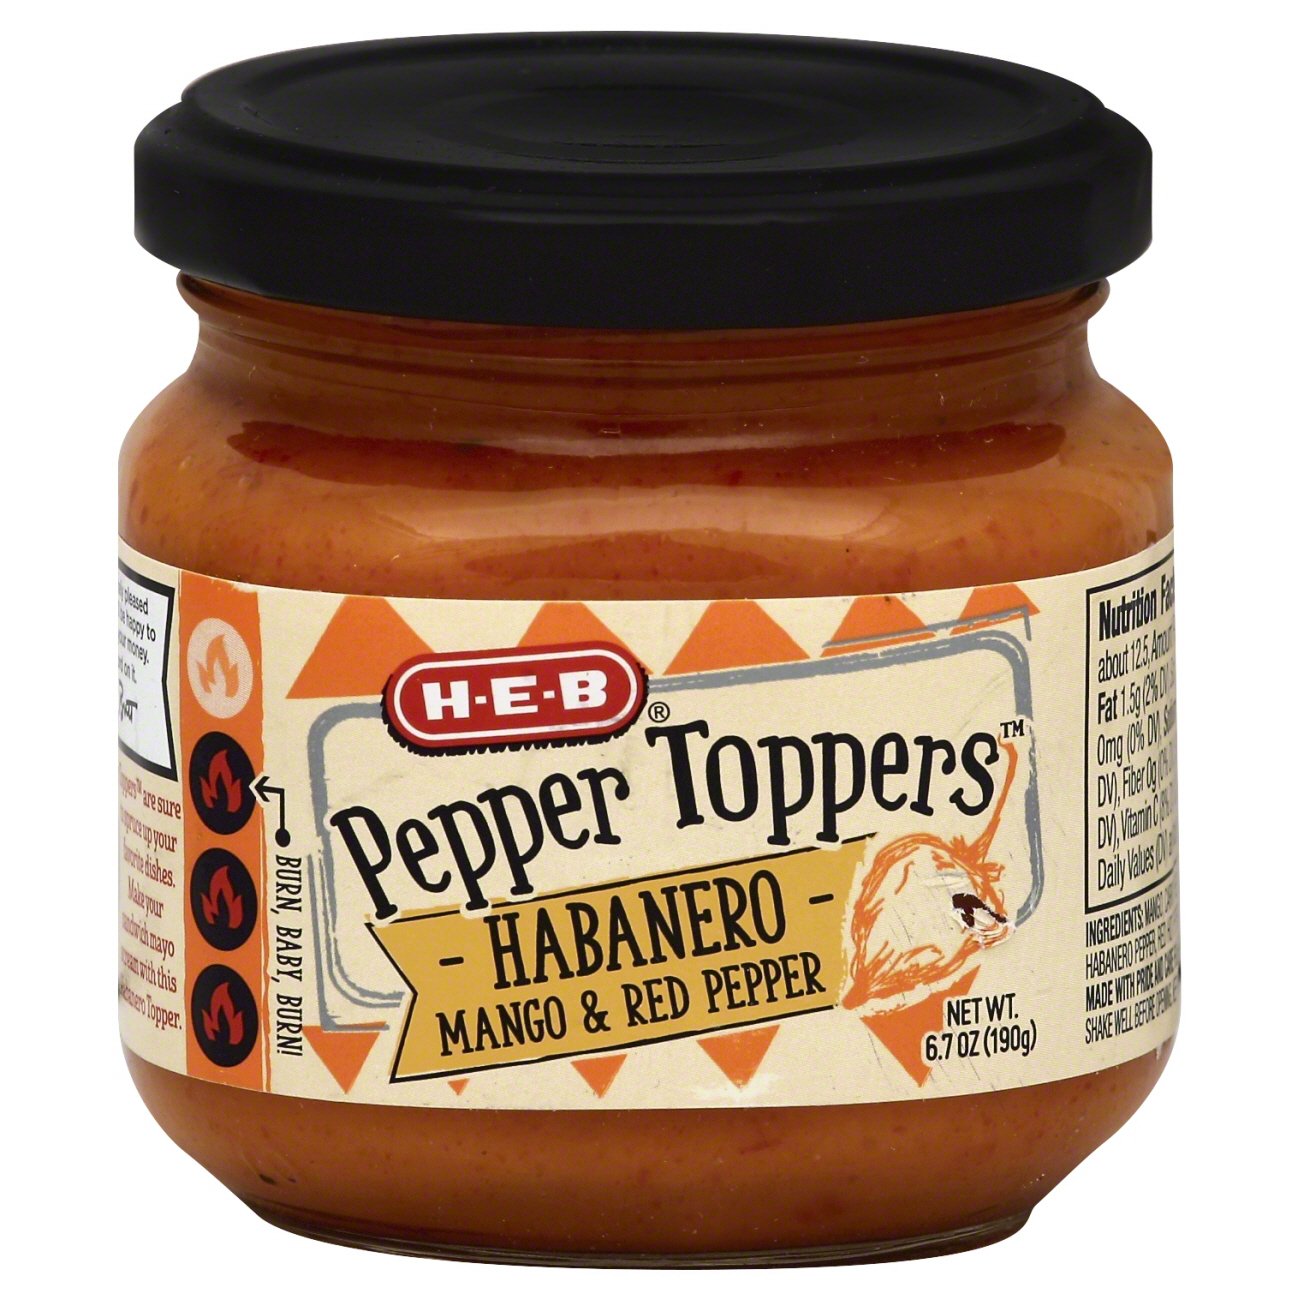 Habanero Pepper Toppers